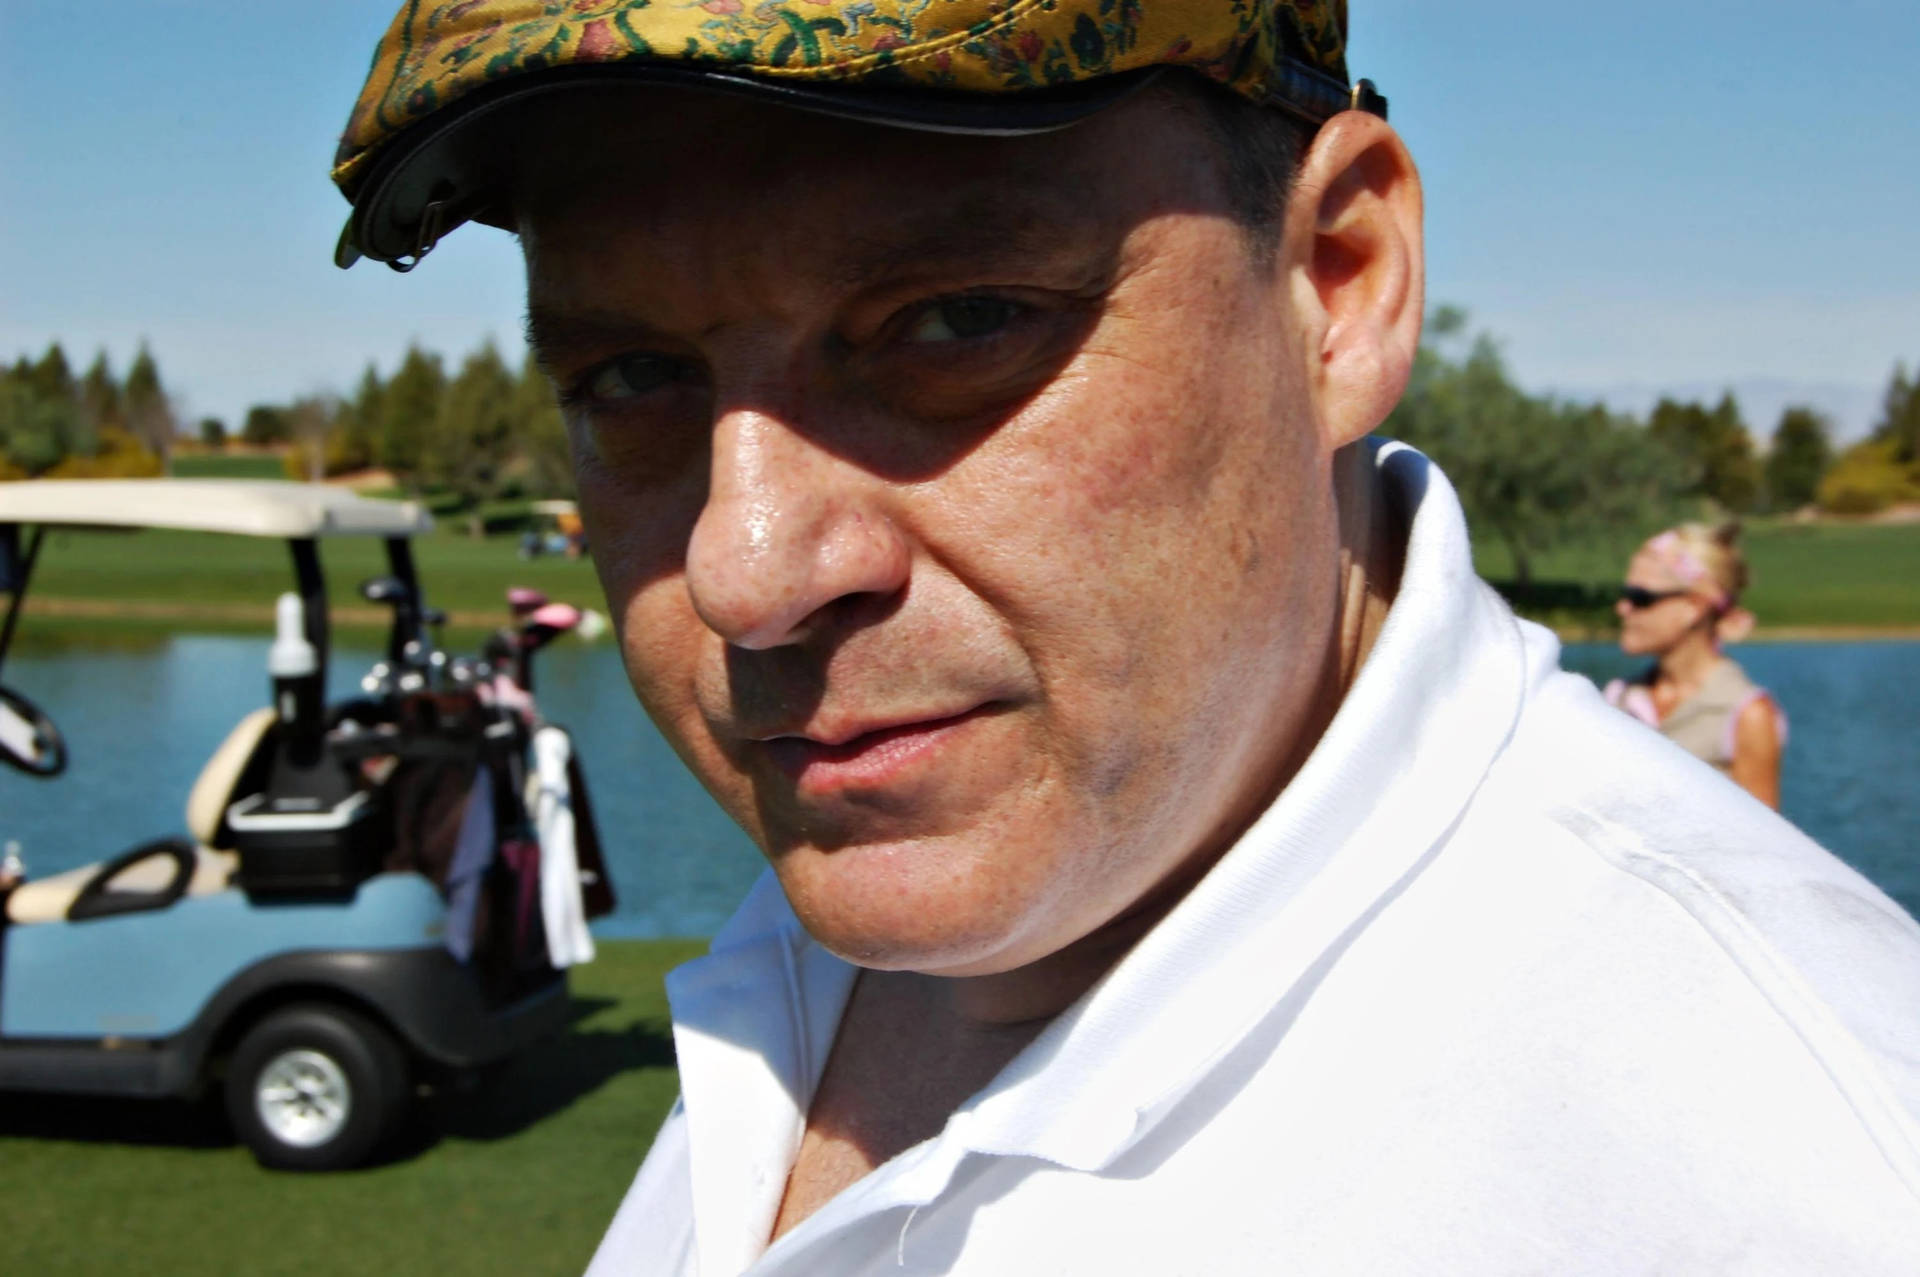 Hollywood actor Tom Sizemore enjoying a game of golf on a sunny day. Wallpaper